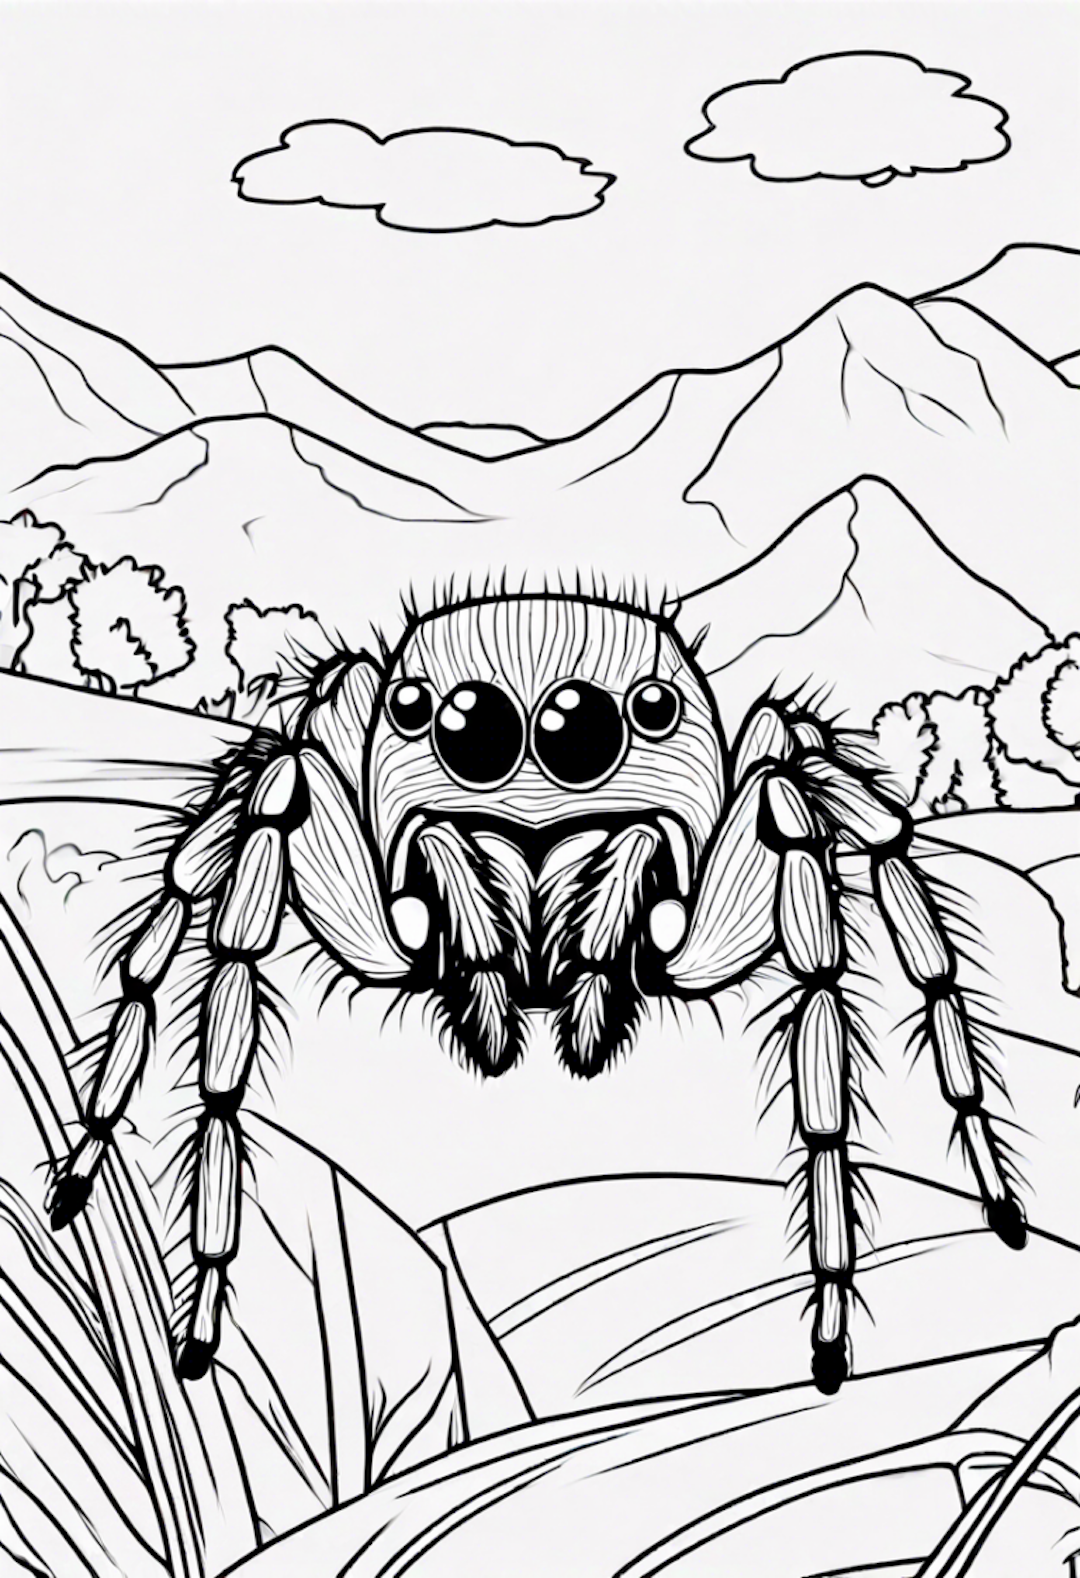 Jumping Spider coloring pages